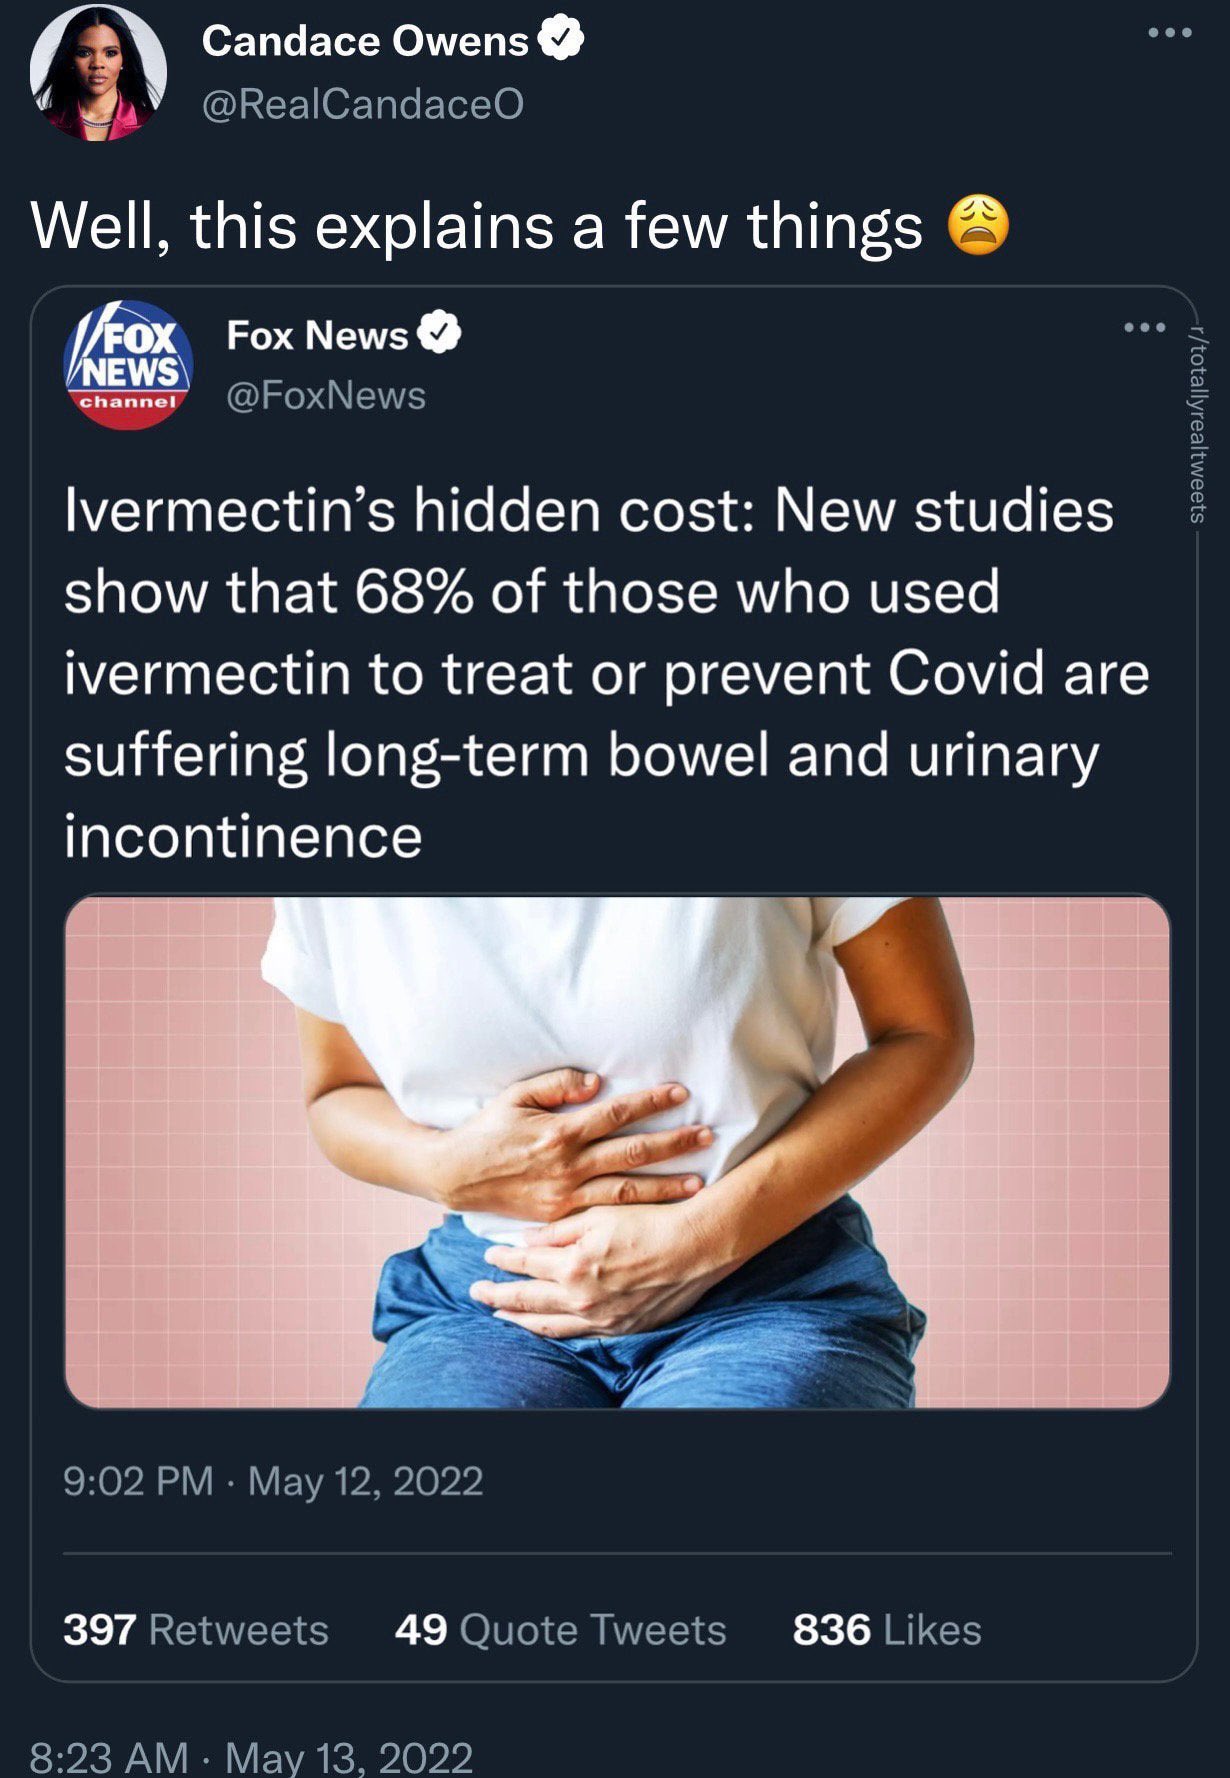 Candace Owens did not respond to a Fox News tweet about ivermectin's hidden cost.